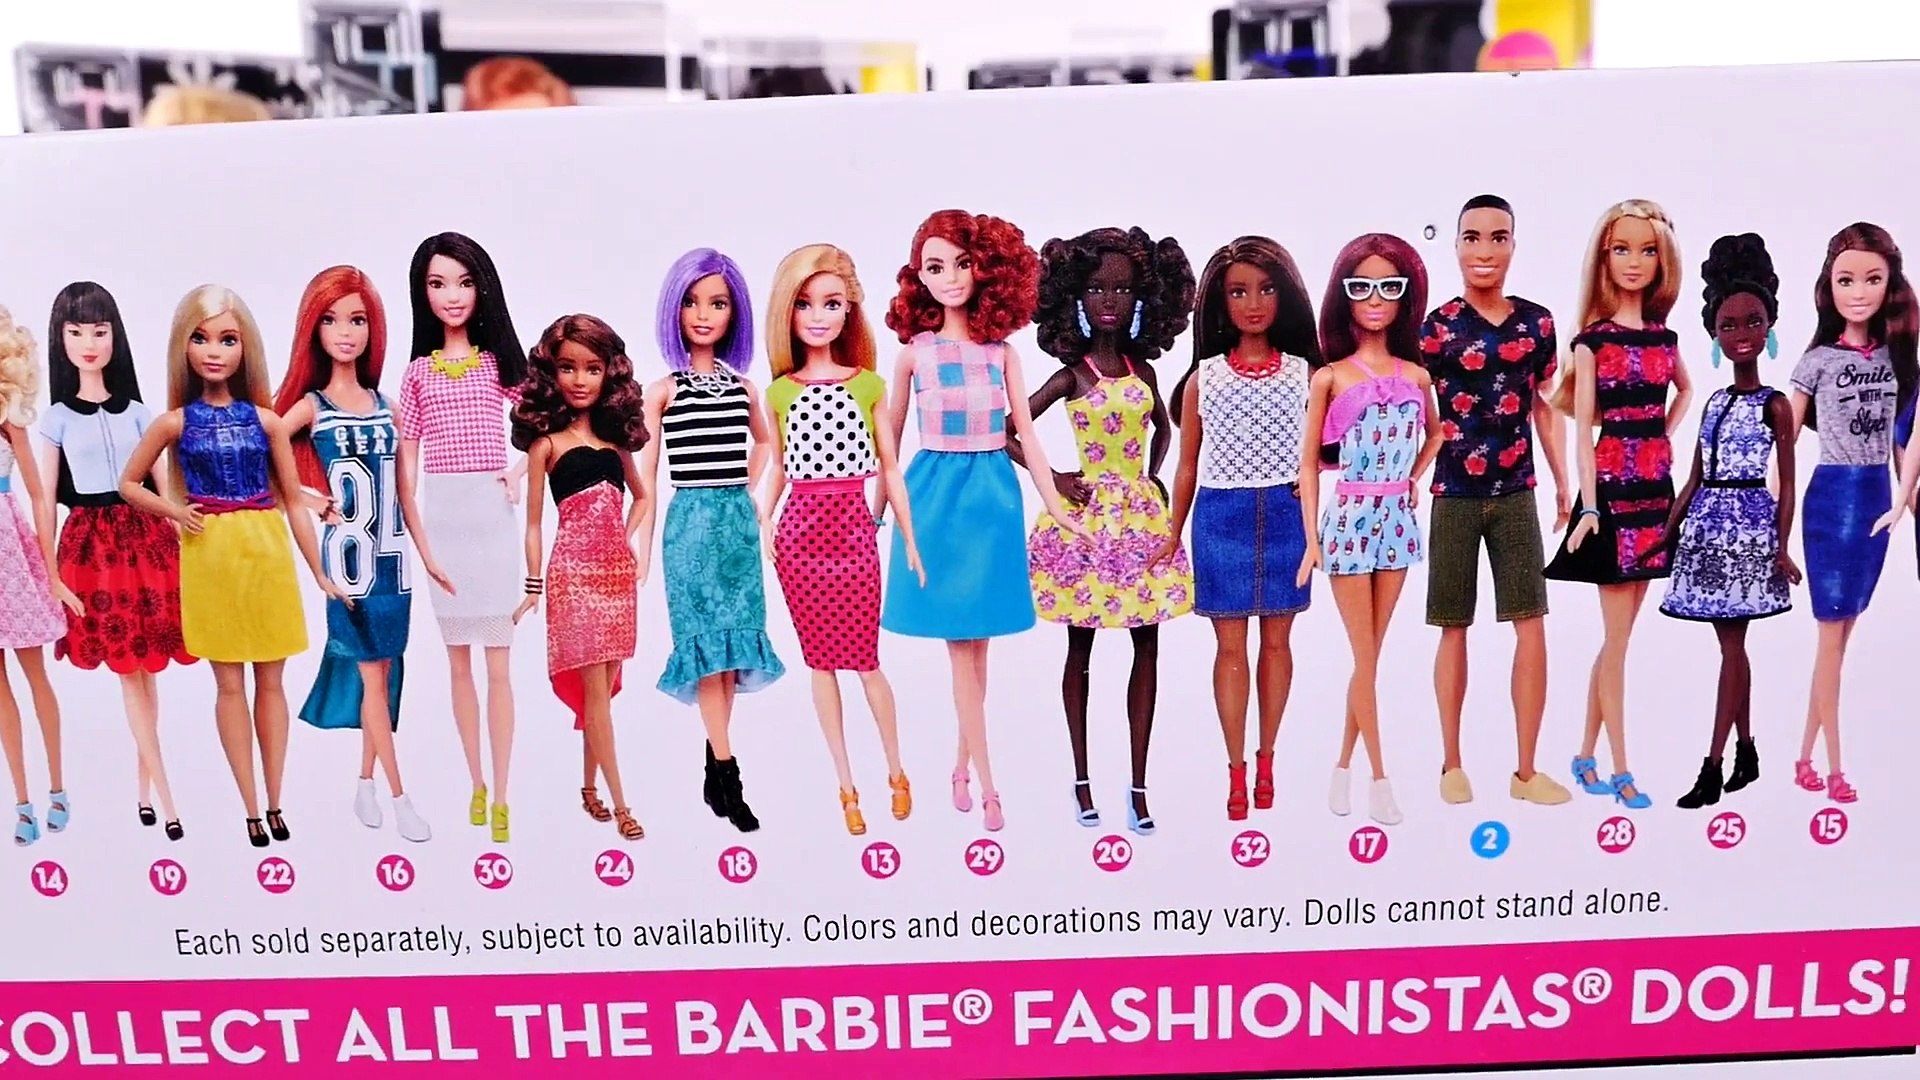 frugtbart relæ Halloween 6 NEW Barbie Fashionistas The Doll Evolves 2016 Mattel Barbies Different  Skin,Hair,Height,Size - video Dailymotion